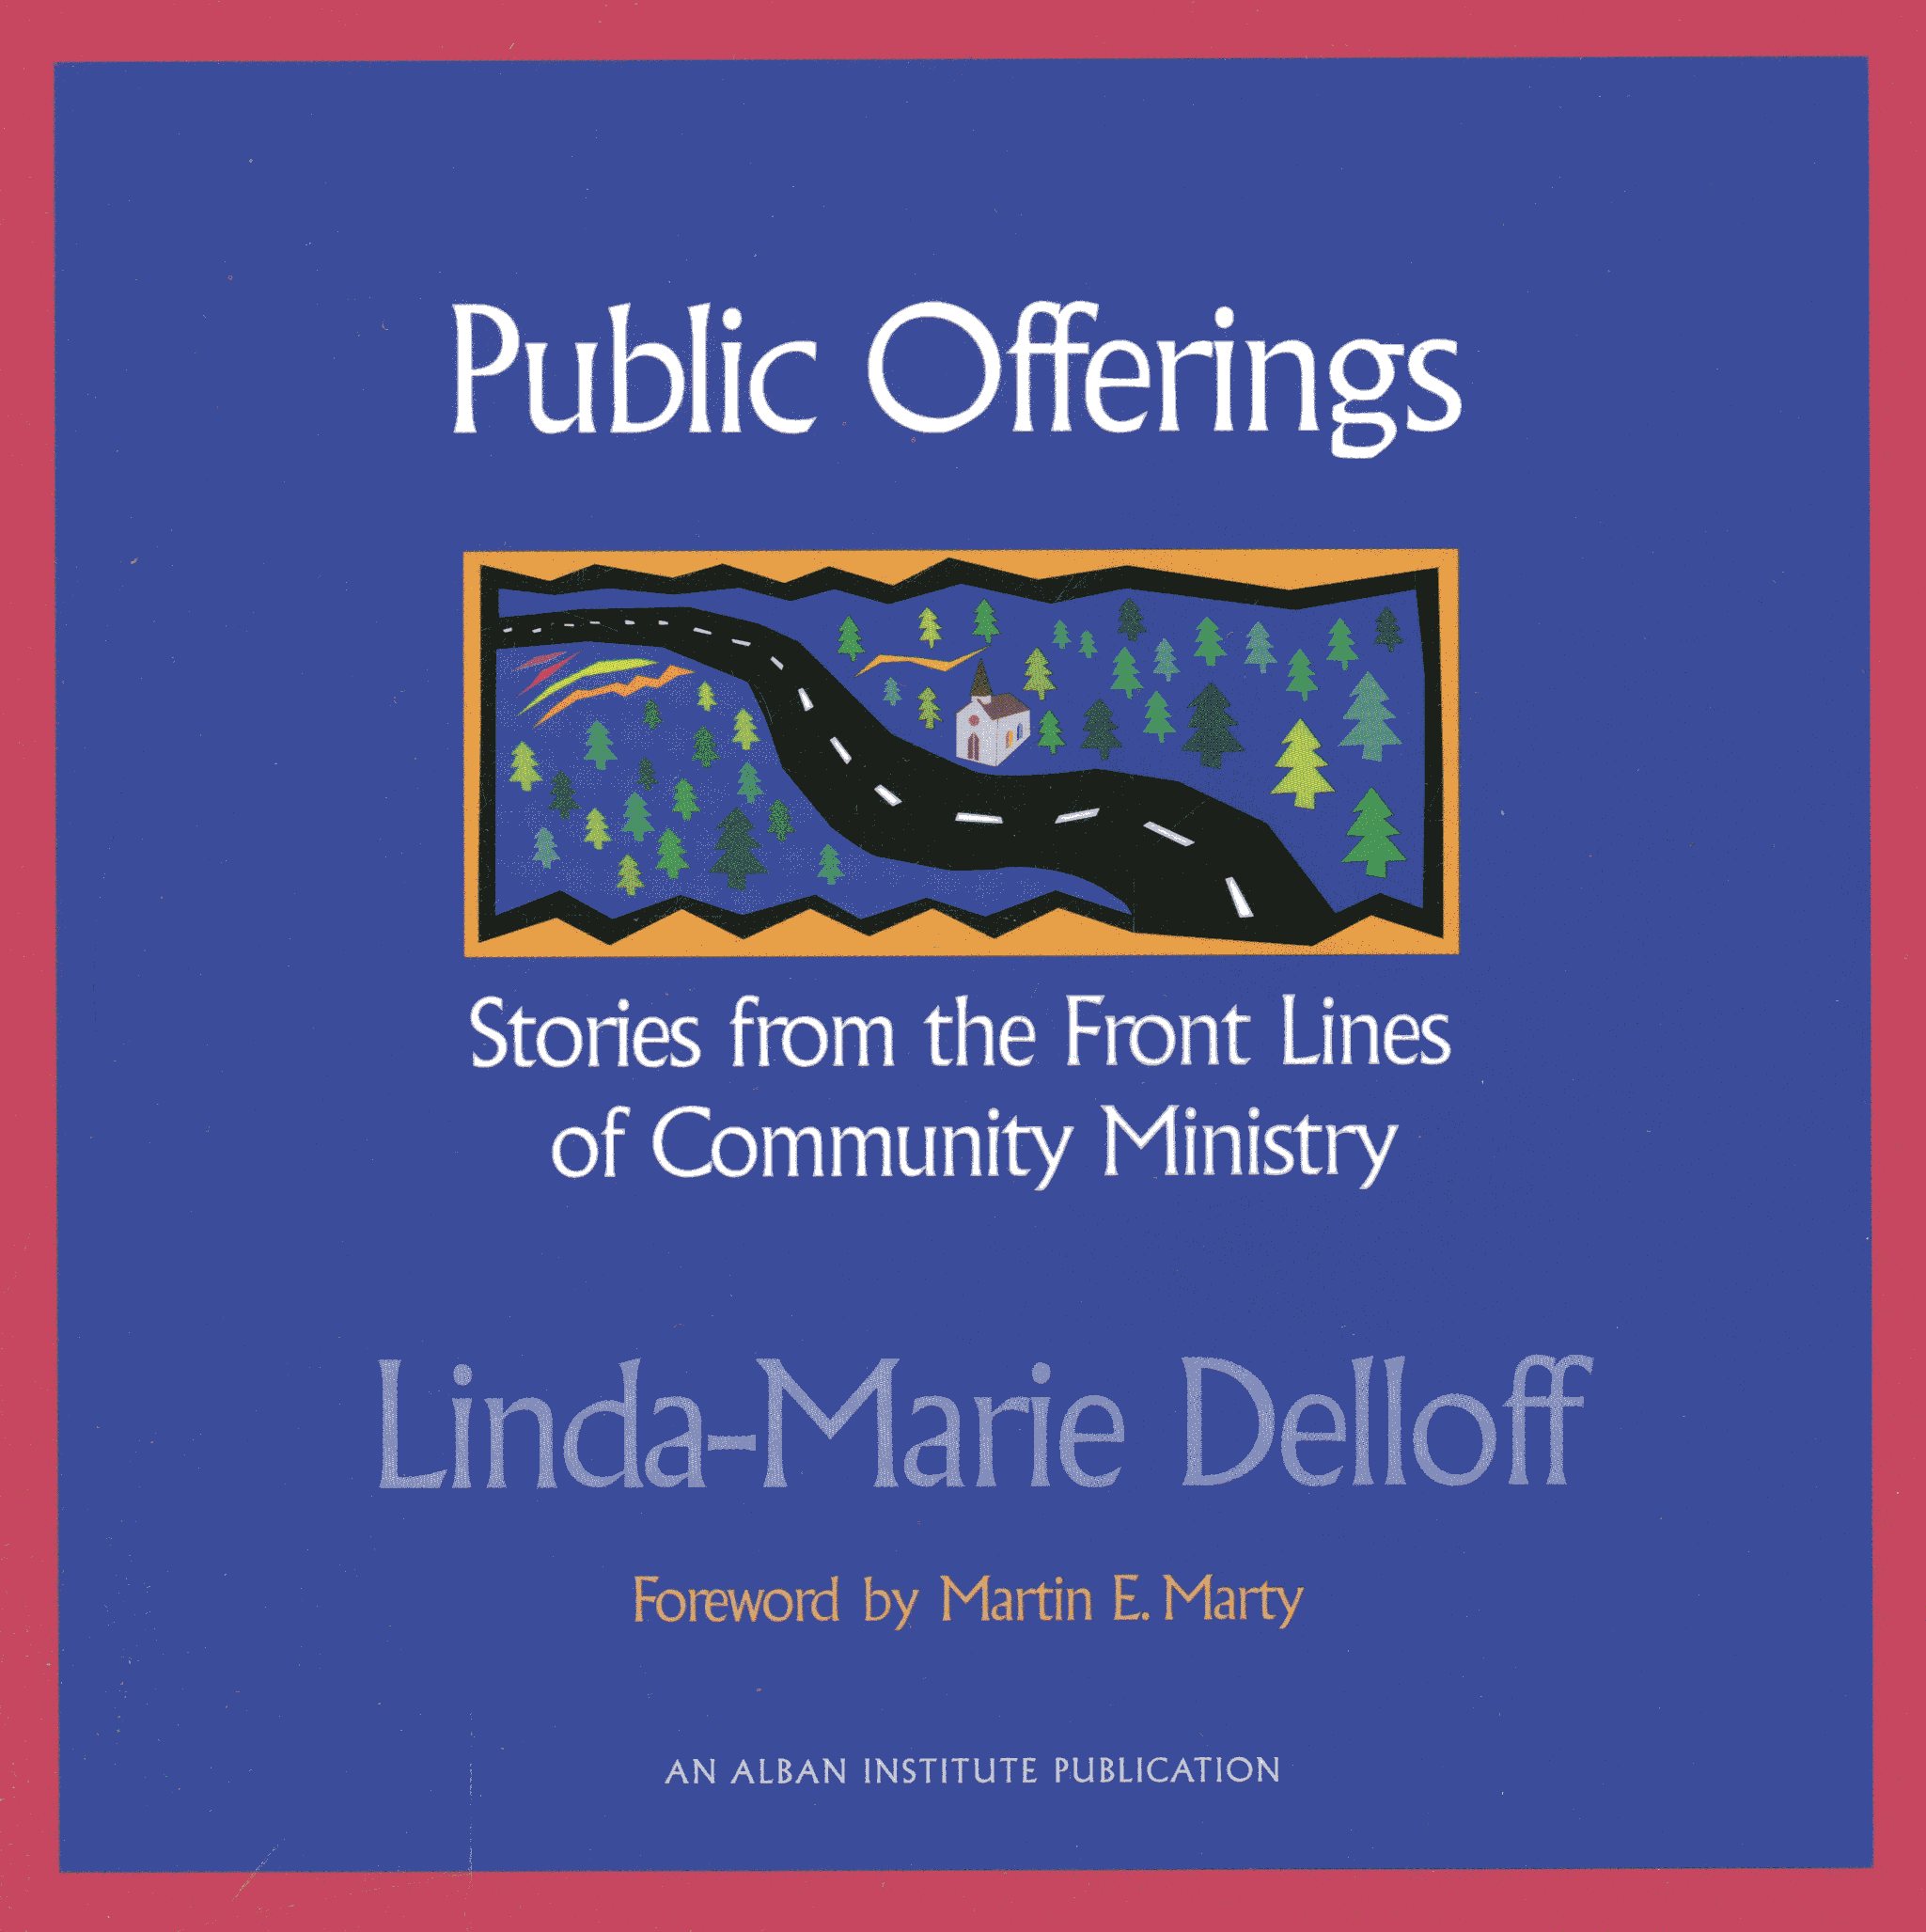 Public Offerings: Stories from the Front Lines of Community Ministry